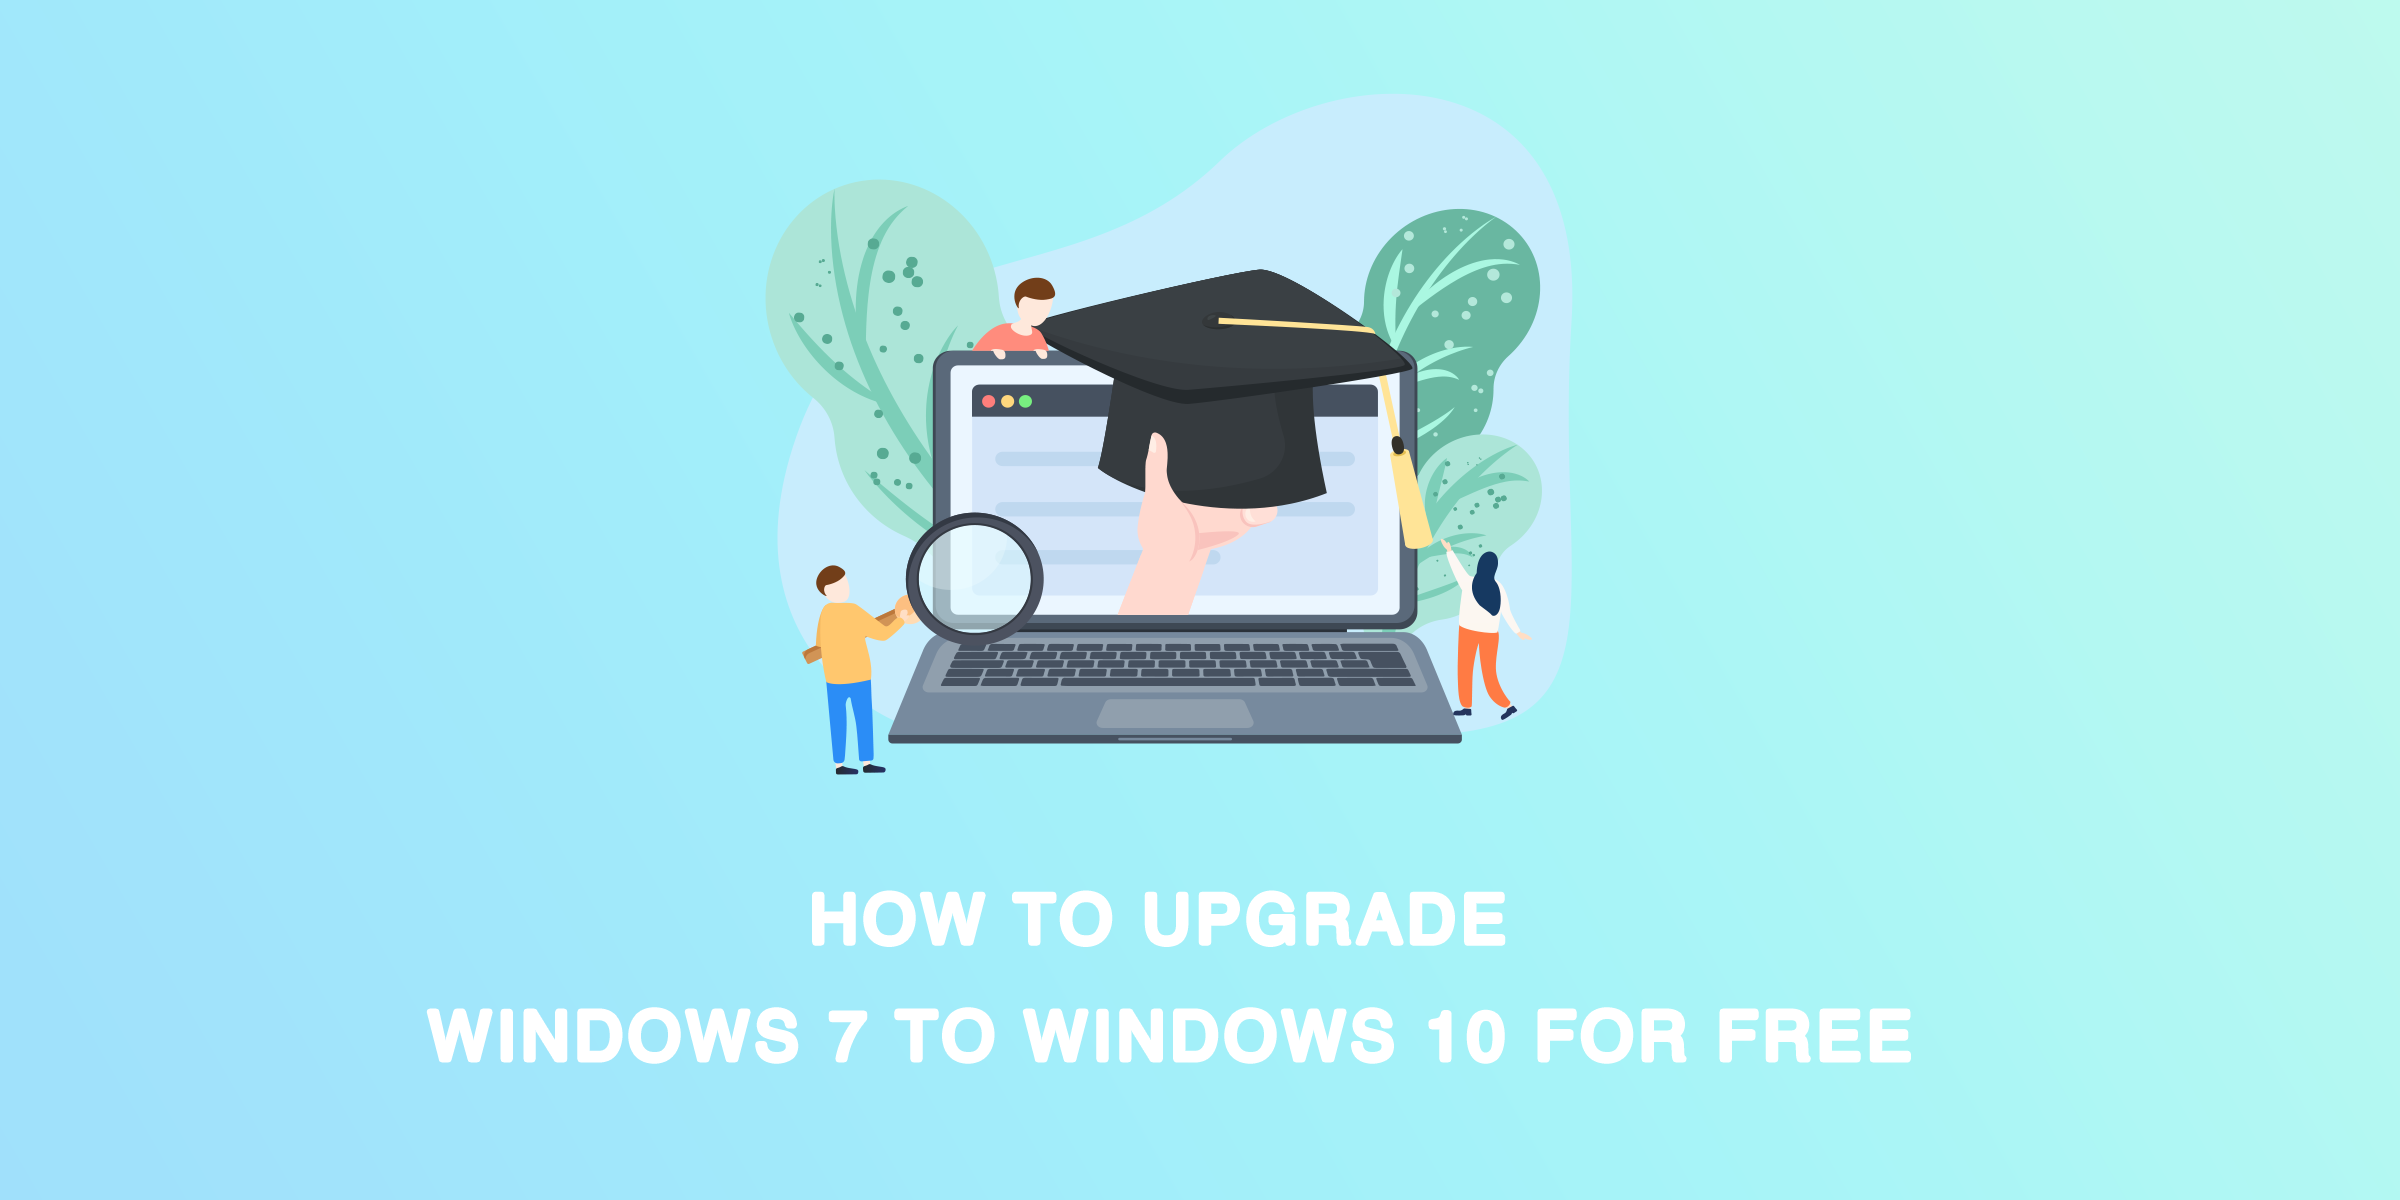 How to Upgrade Windows 7 to Windows 10 for Free